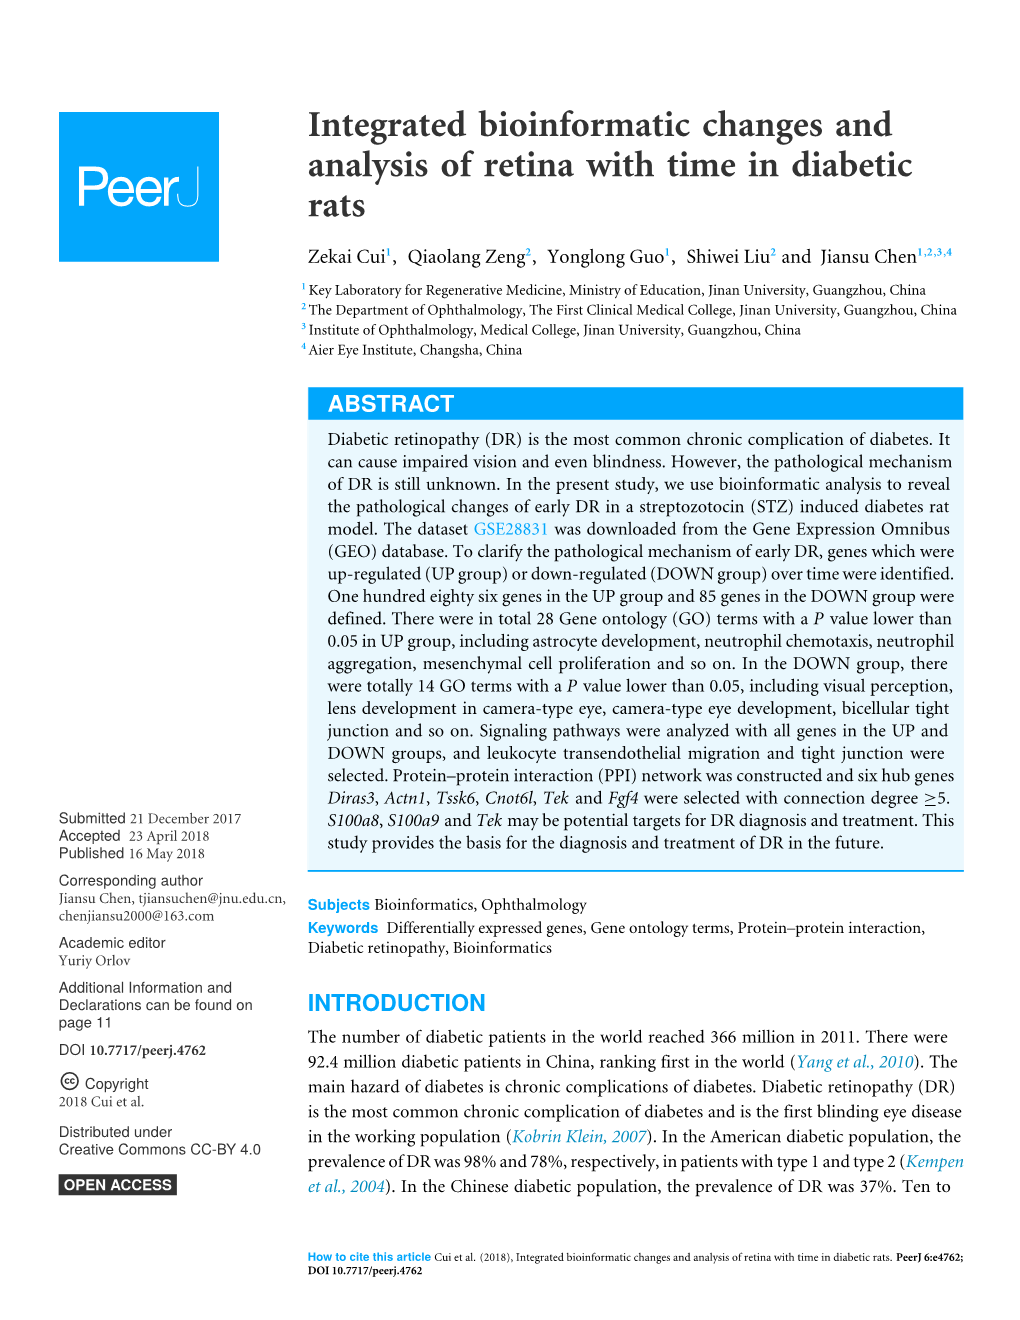 Integrated Bioinformatic Changes and Analysis of Retina with Time in Diabetic Rats